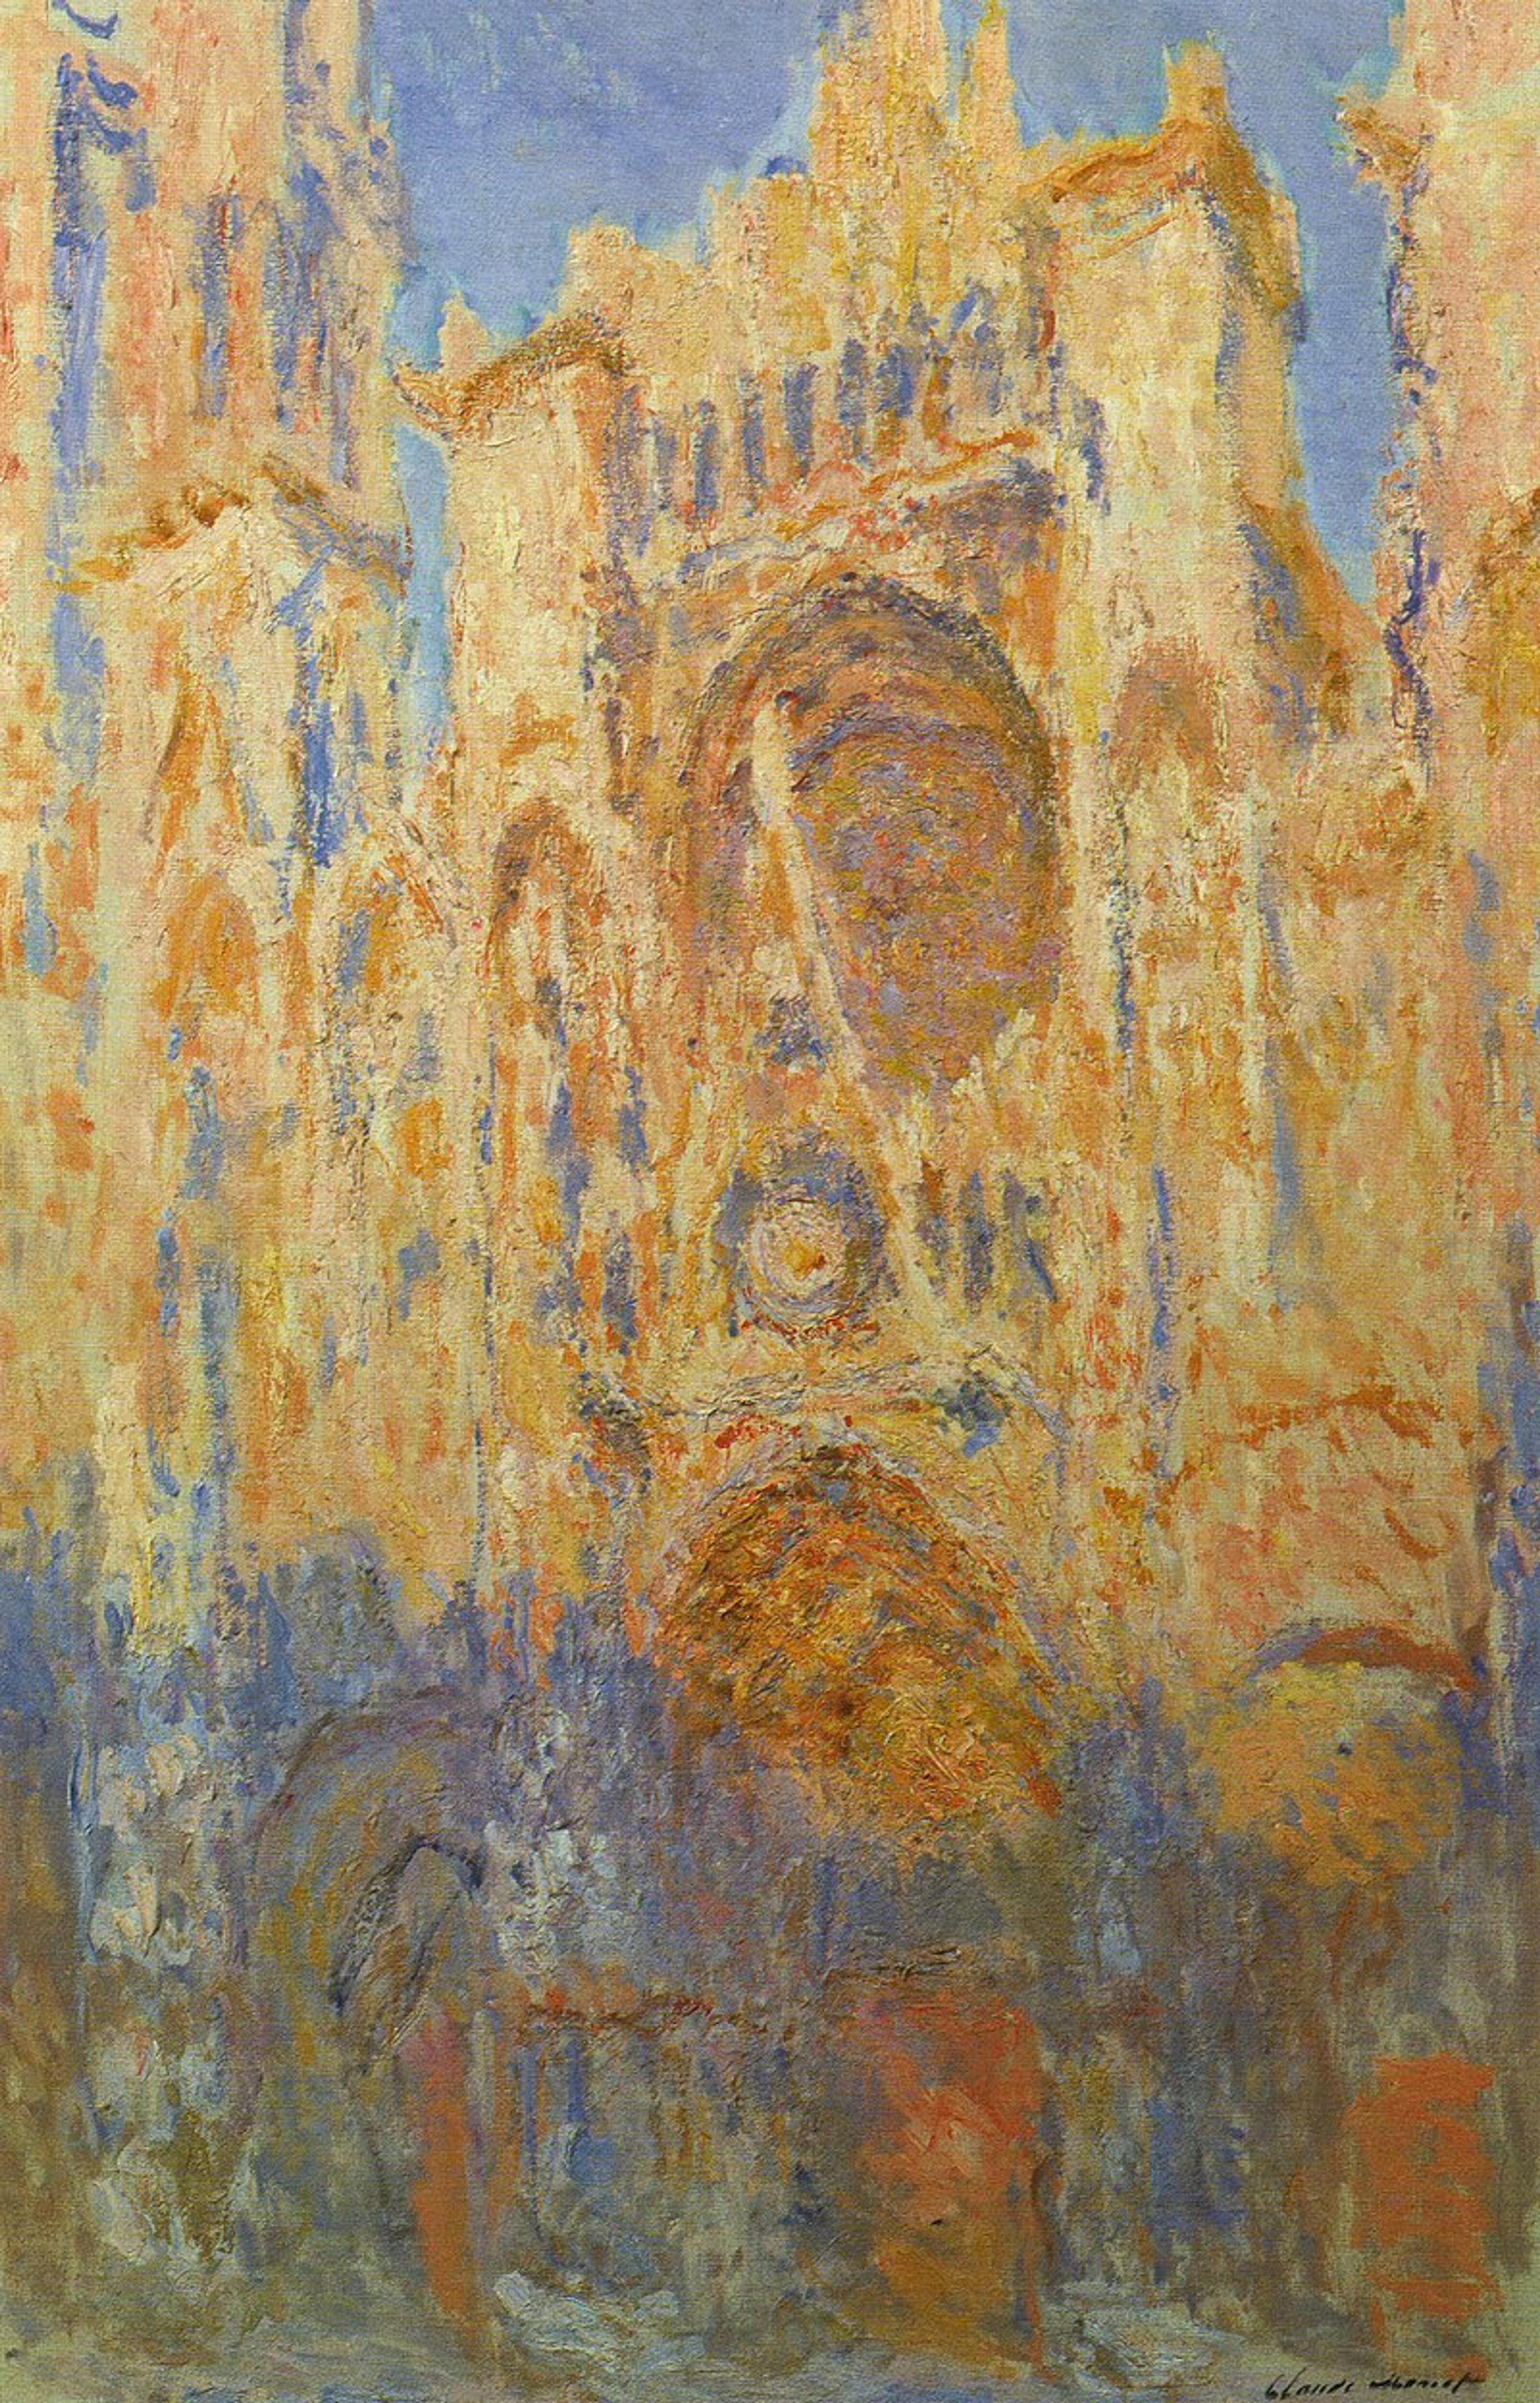 A view. ofthe Rouen Cathedral, done in large, blurred brushstrokes. The colour palette is mostly tone in tones of gold, with some blue to depict shadows and the sky